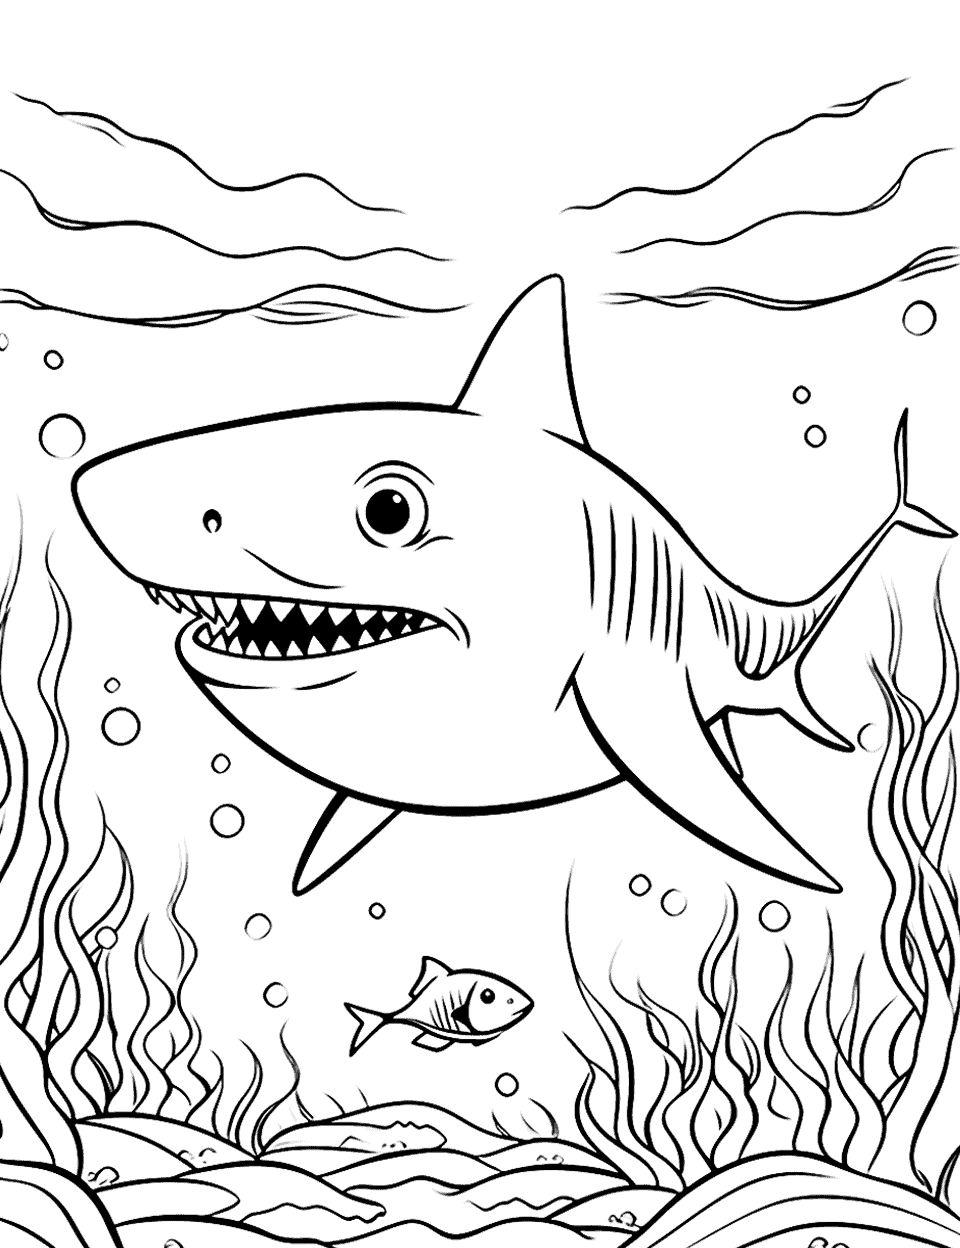 Fish and Shark Hide Seek Coloring Page - A fun scene of fish and a shark playing hide and seek in the coral reef.